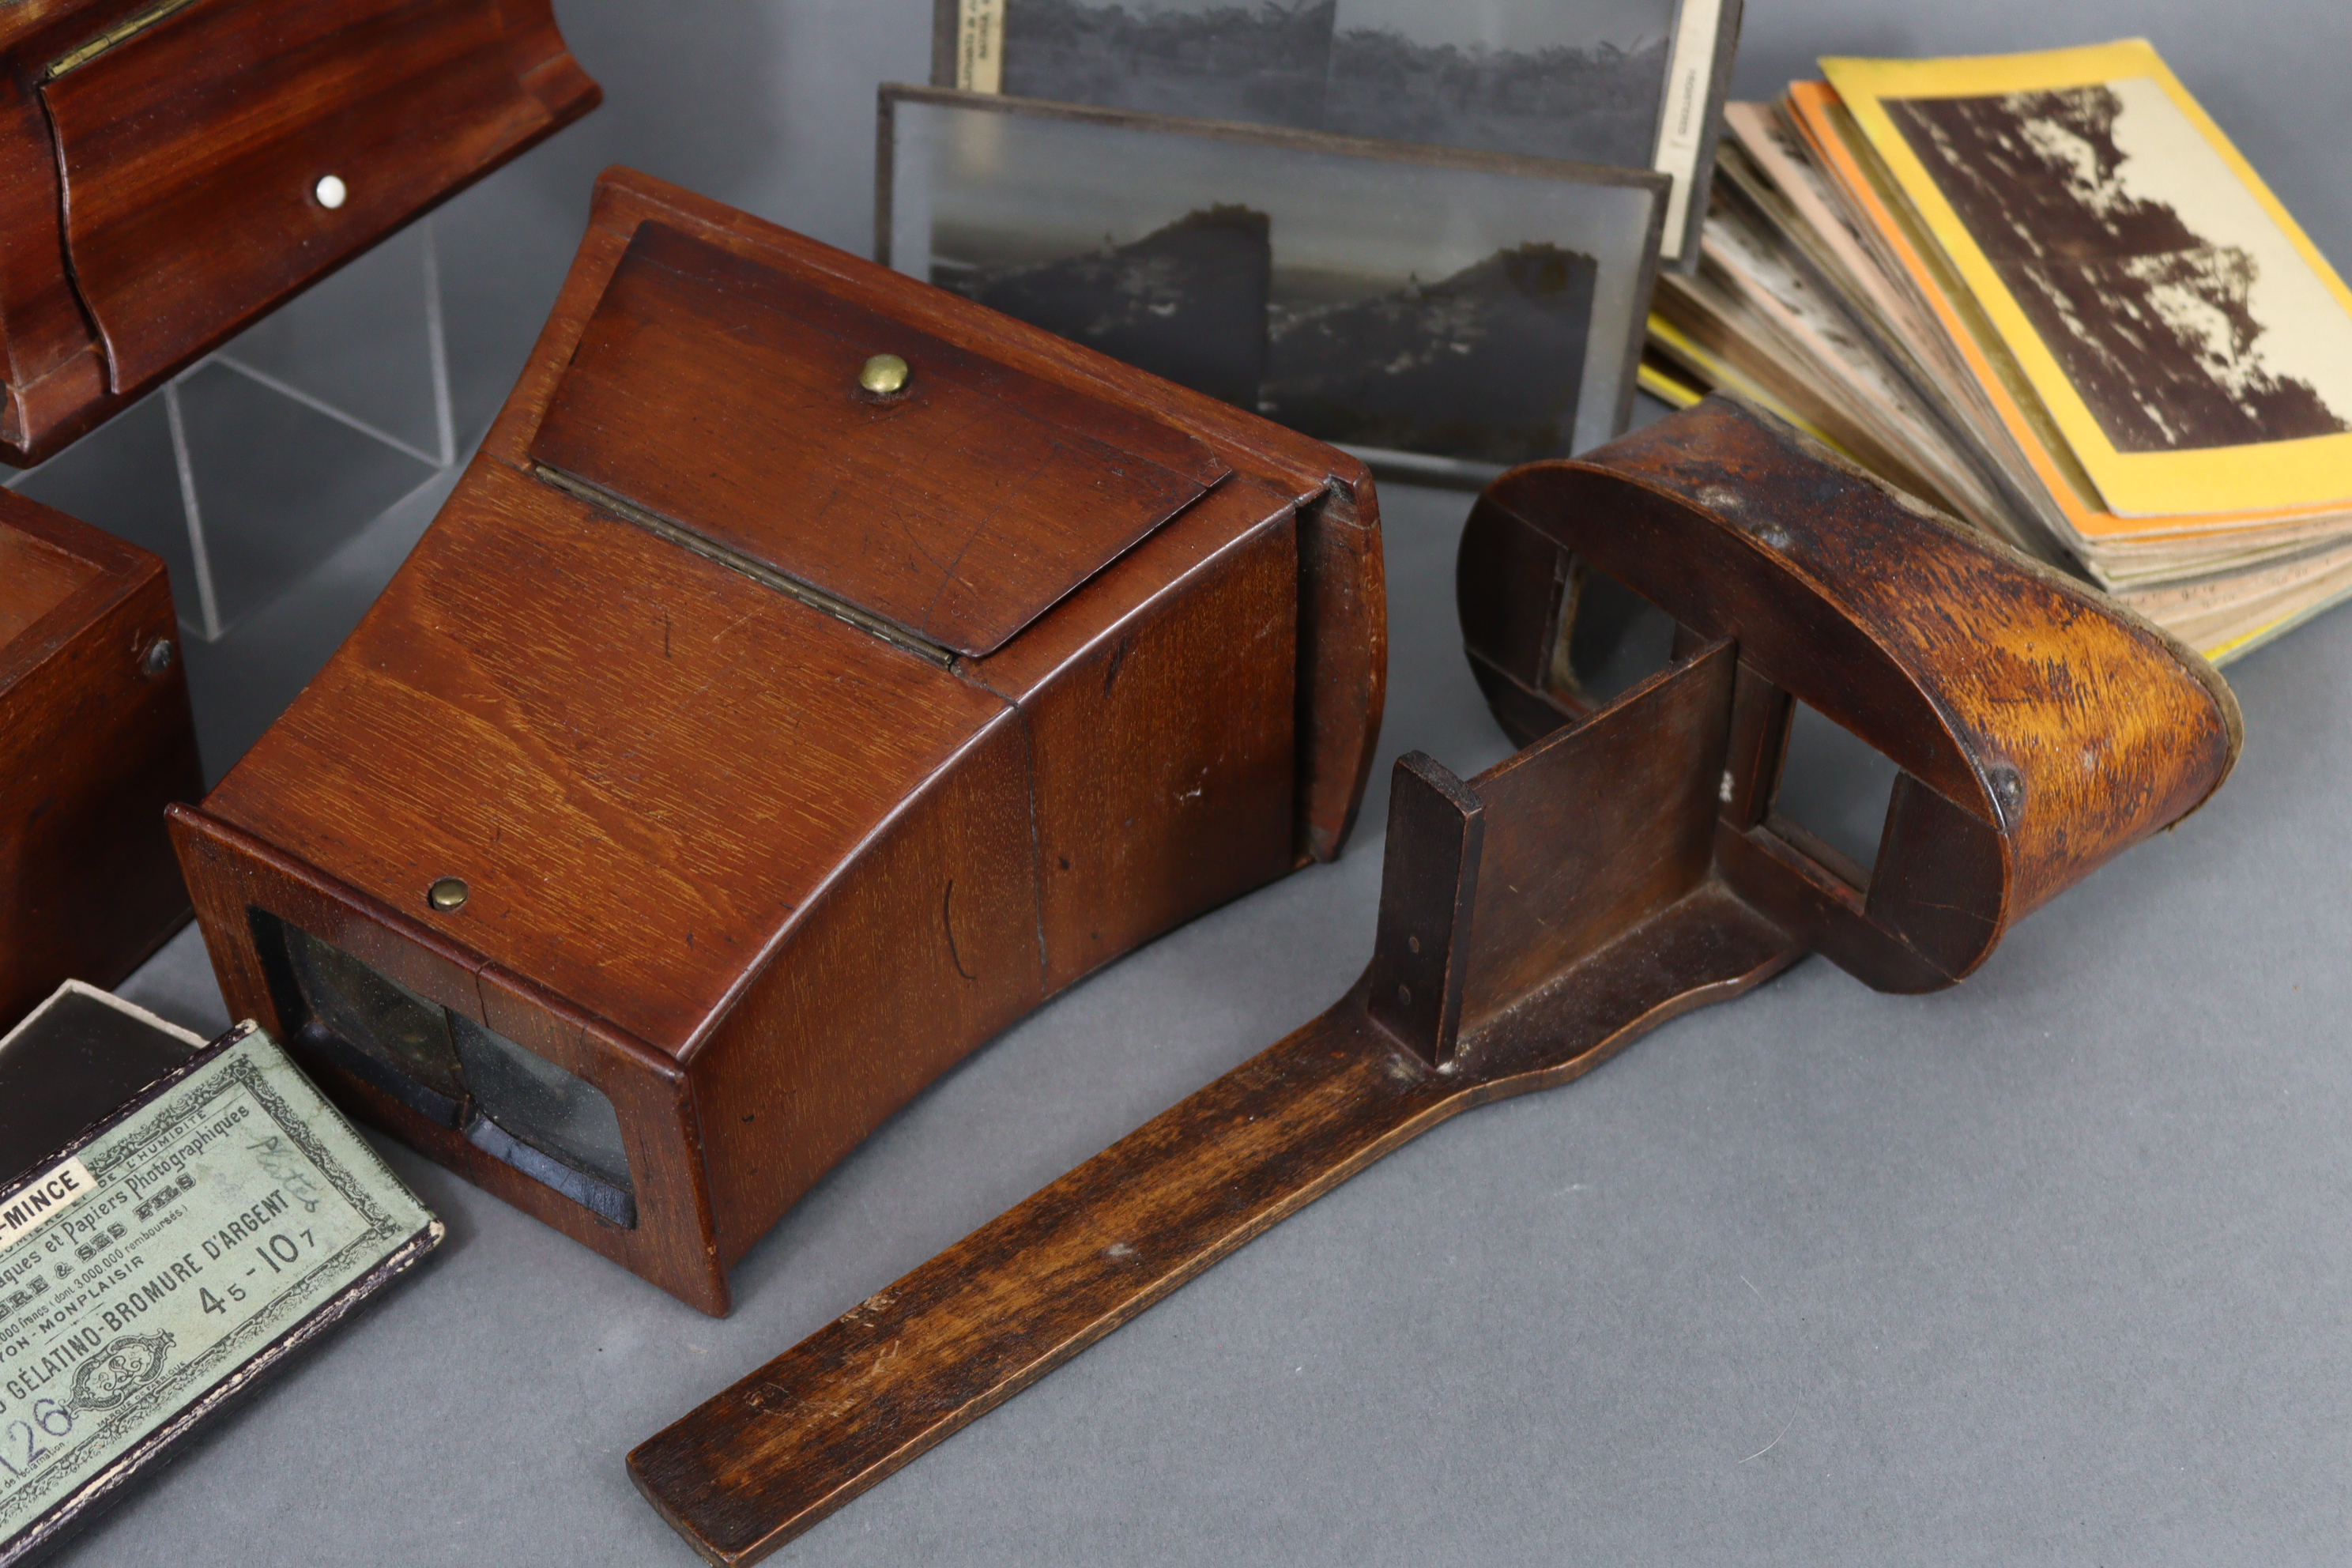 Four stereo-card viewers; a stereo-card storage box; & a quantity of stereoview cards. - Image 5 of 8